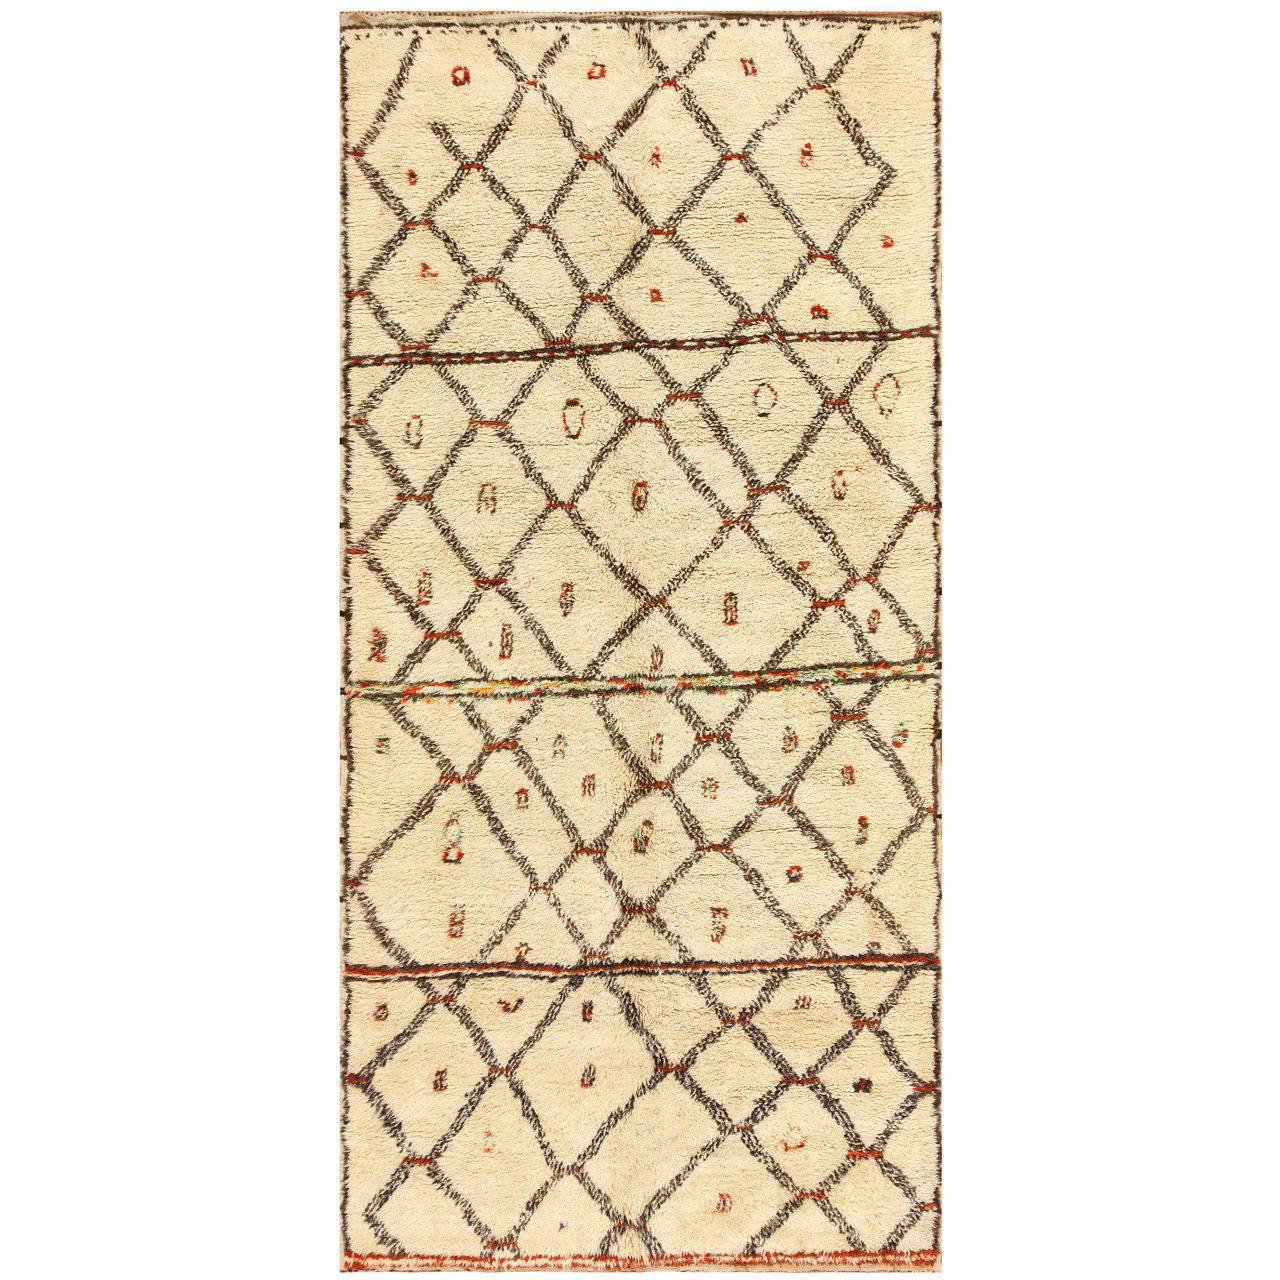 Tapis marocain vintage ivoire. Taille : 5 ft 8 in x 12 ft